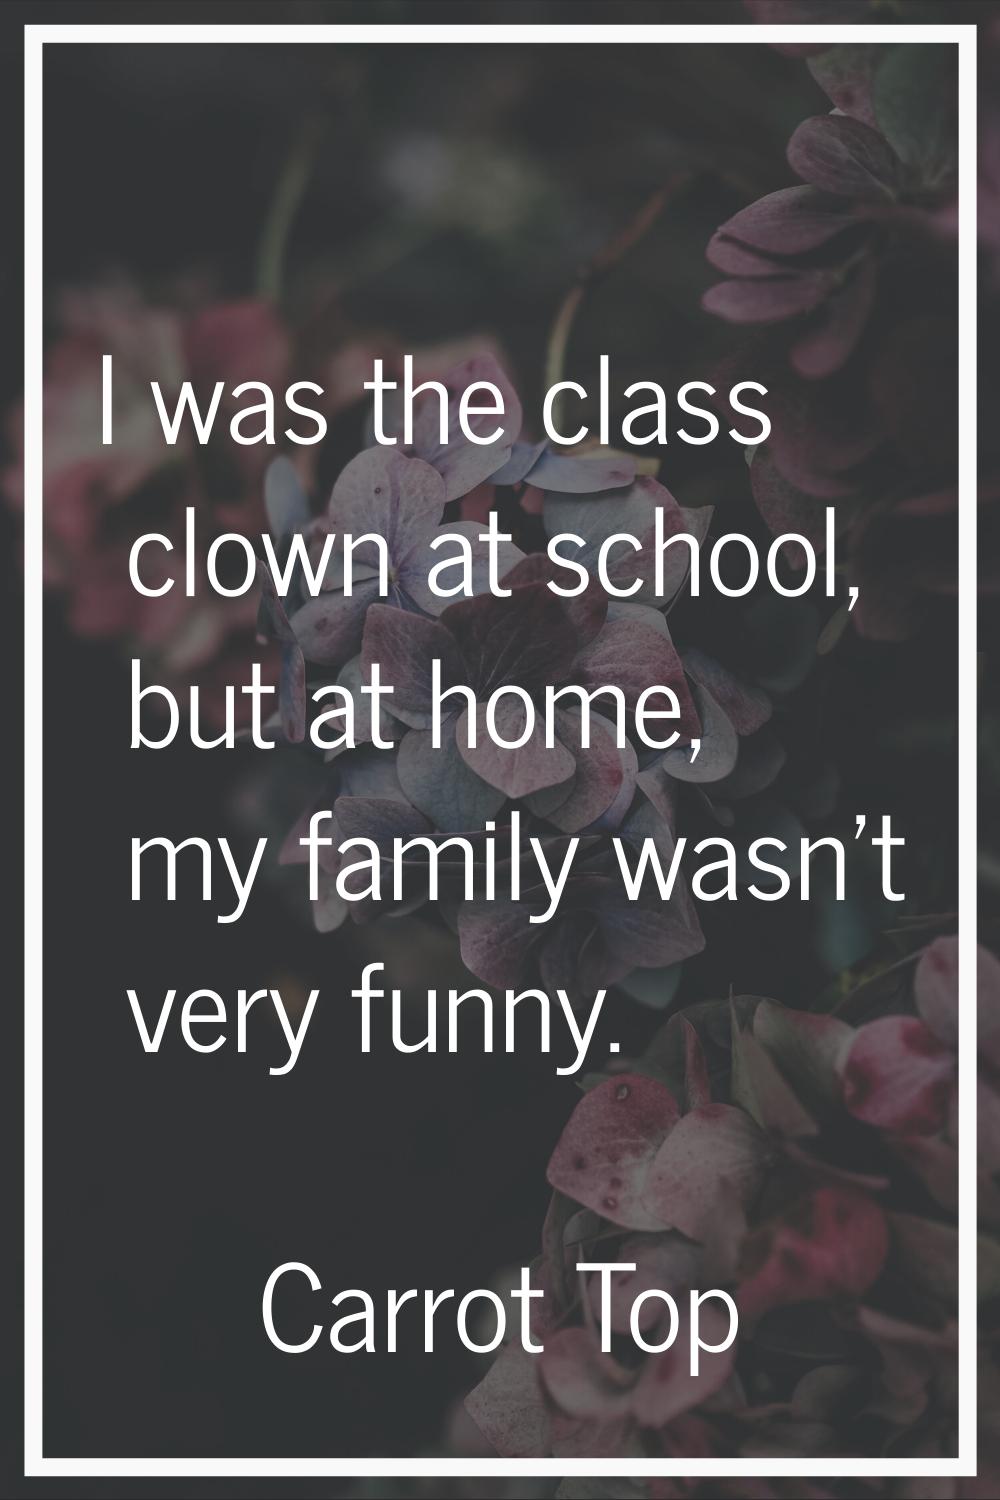 I was the class clown at school, but at home, my family wasn't very funny.